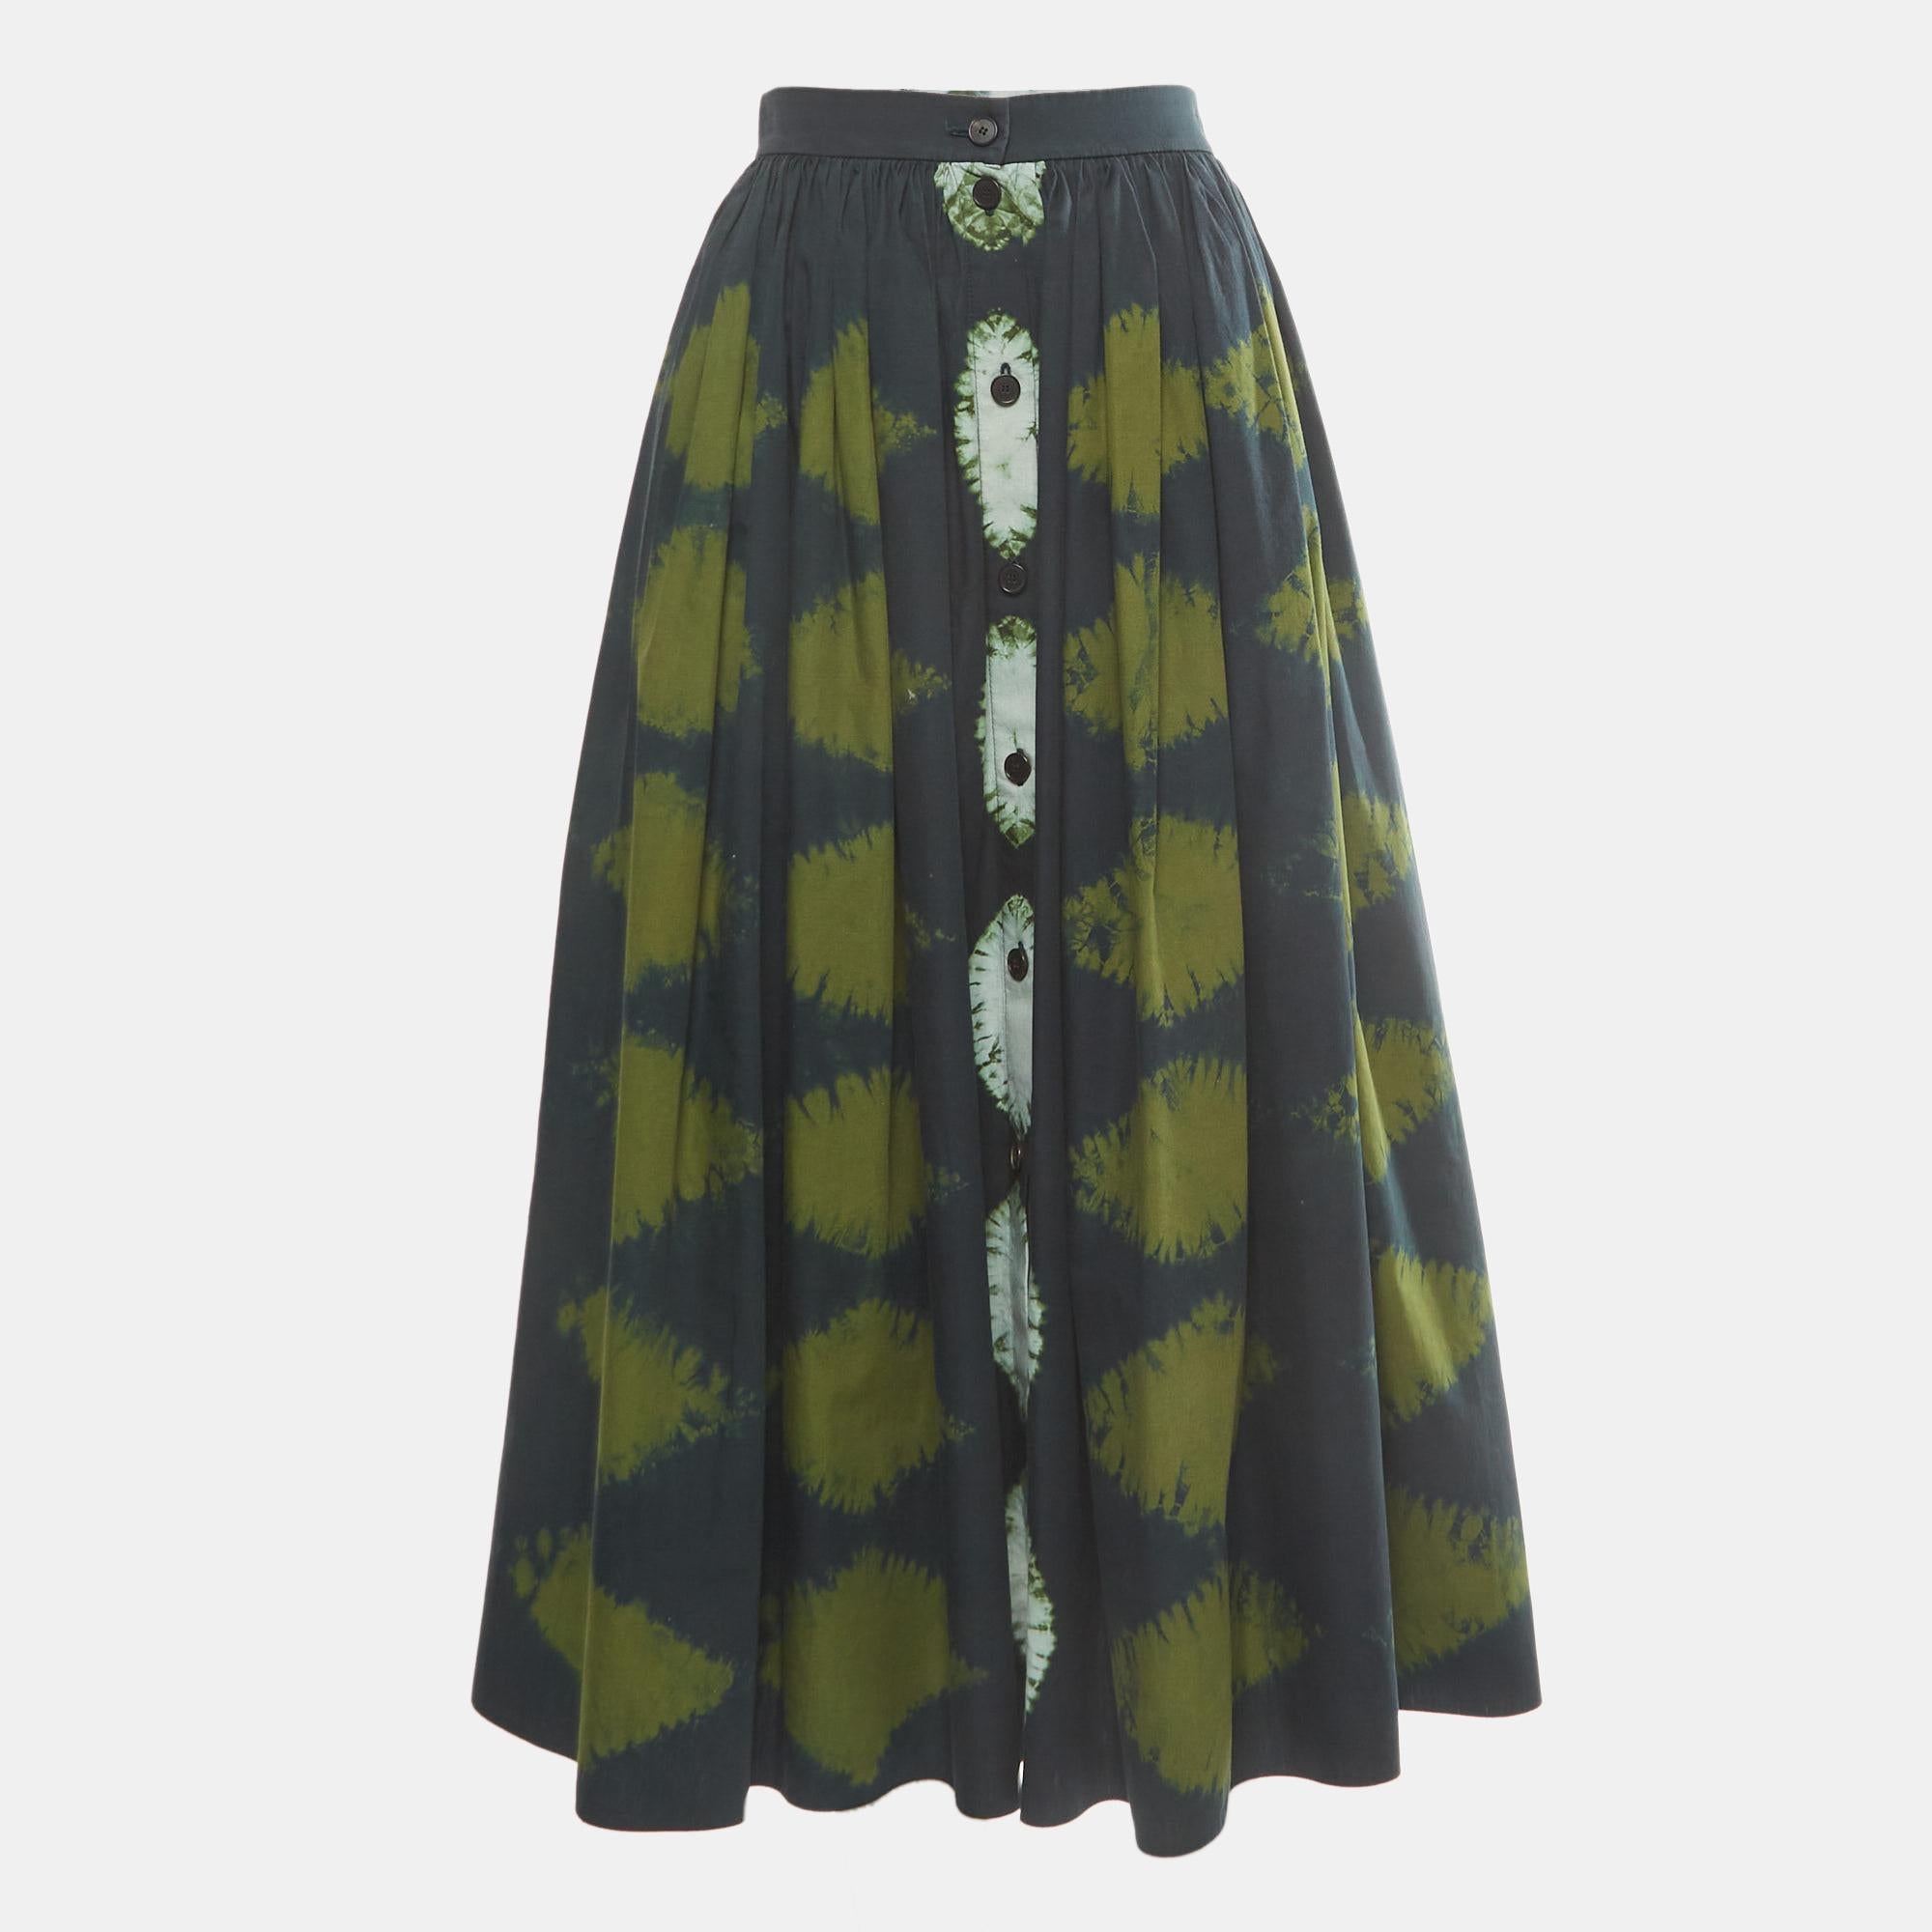 This elegant Dior midi skirt is worth adding to your closet! Crafted from fine materials, it is exquisitely designed into a flattering shape.

